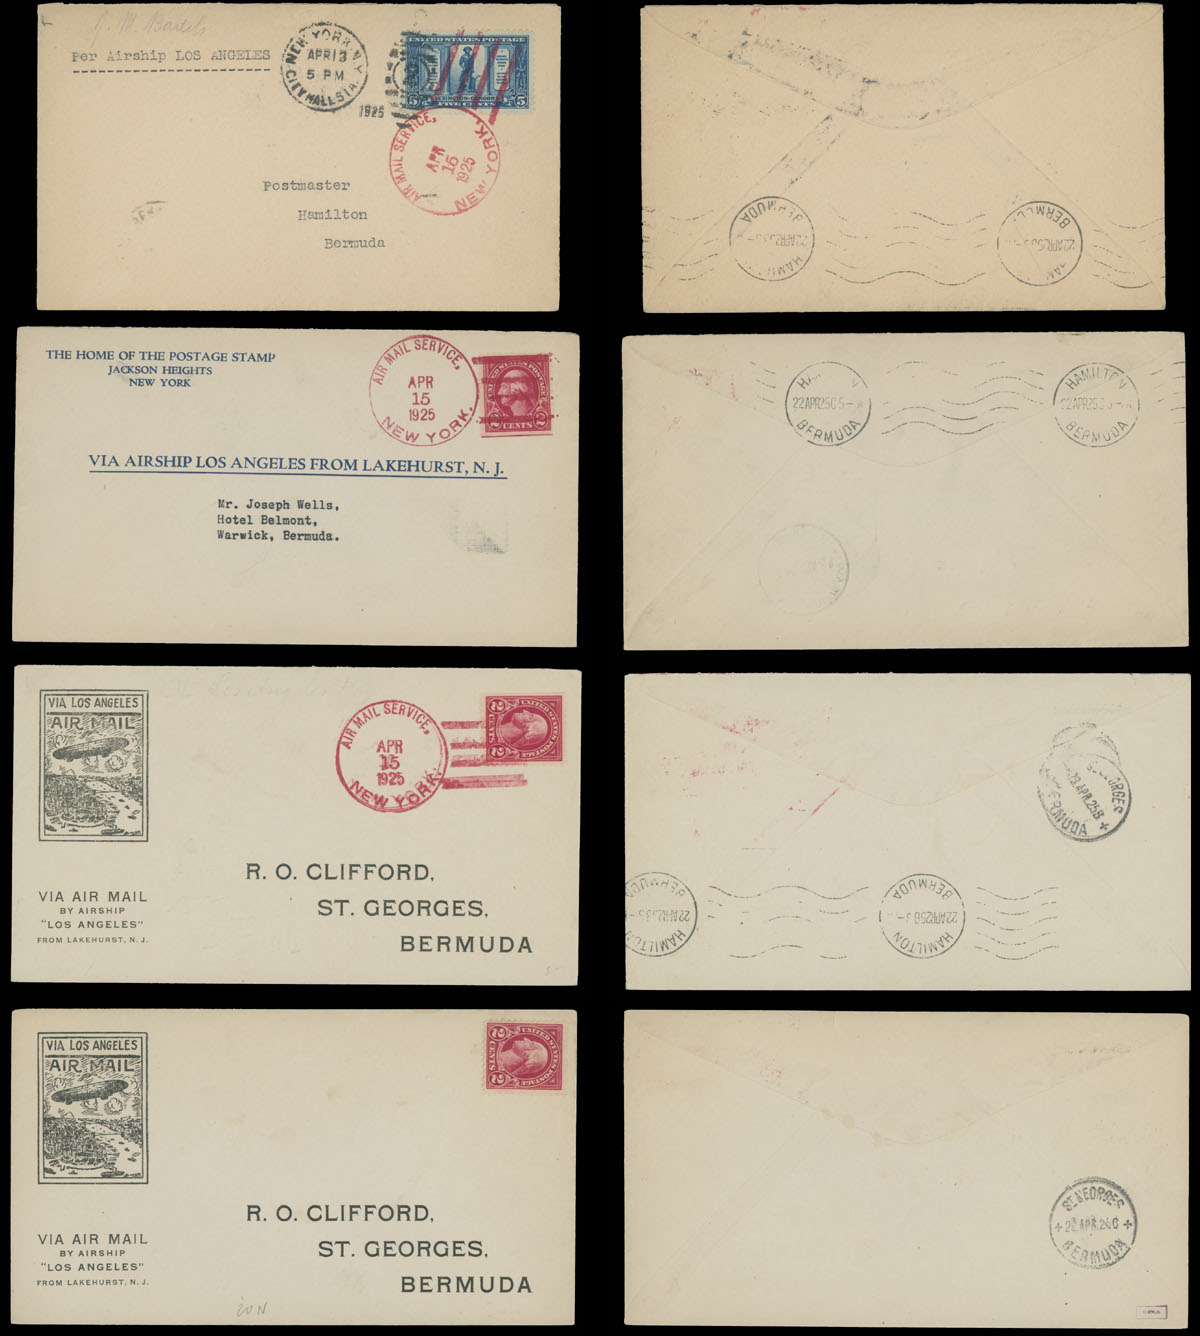 Lot 4 - 1. Worldwide Air Post Stamps and Postal History united states -  Raritan Stamps Inc. Auction #95 Worldwide Air Post Stamps and Philatelic Rarities of the World